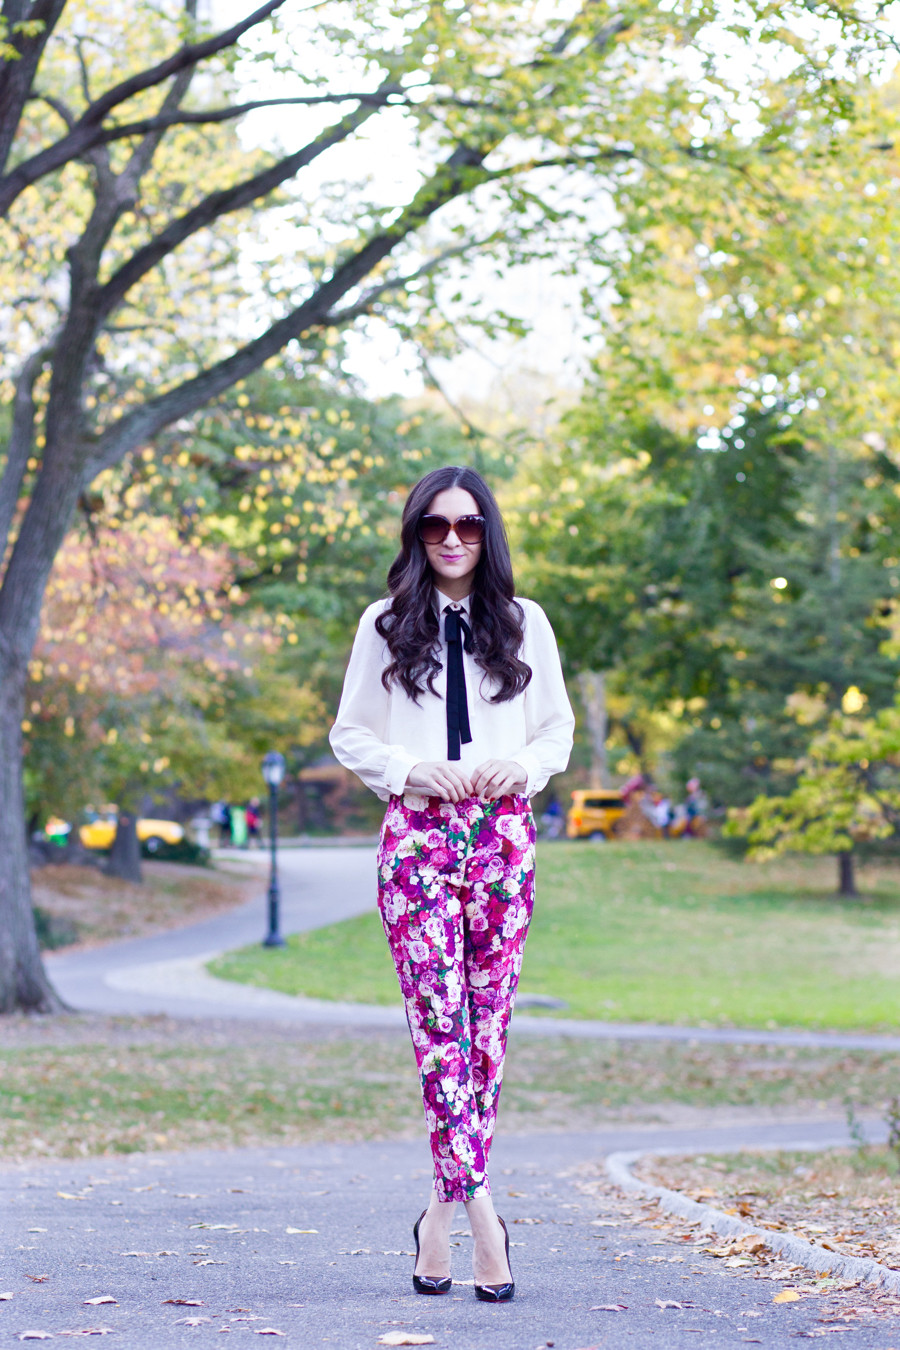 Kate Spade Jackie Capri, Kate Spade Rose Print Jackie Capri, Kate Spade Rose Print Pants, Kate Spade Floral Print Pants, H&M Crepe Blouse, H&M Bow Blouse, H&M Beige Blouse with Bow,  Zara Cape Jacket, Zara Cape in Black, Christian Louboutin 120 mm, Christian Louboutin Pigalle 120 mm, Louboutin Pigalle in Black Patent Leather, Chanel PST, Chanel PST in Black Leather, Zara Short Cape with Faux Leather Detail